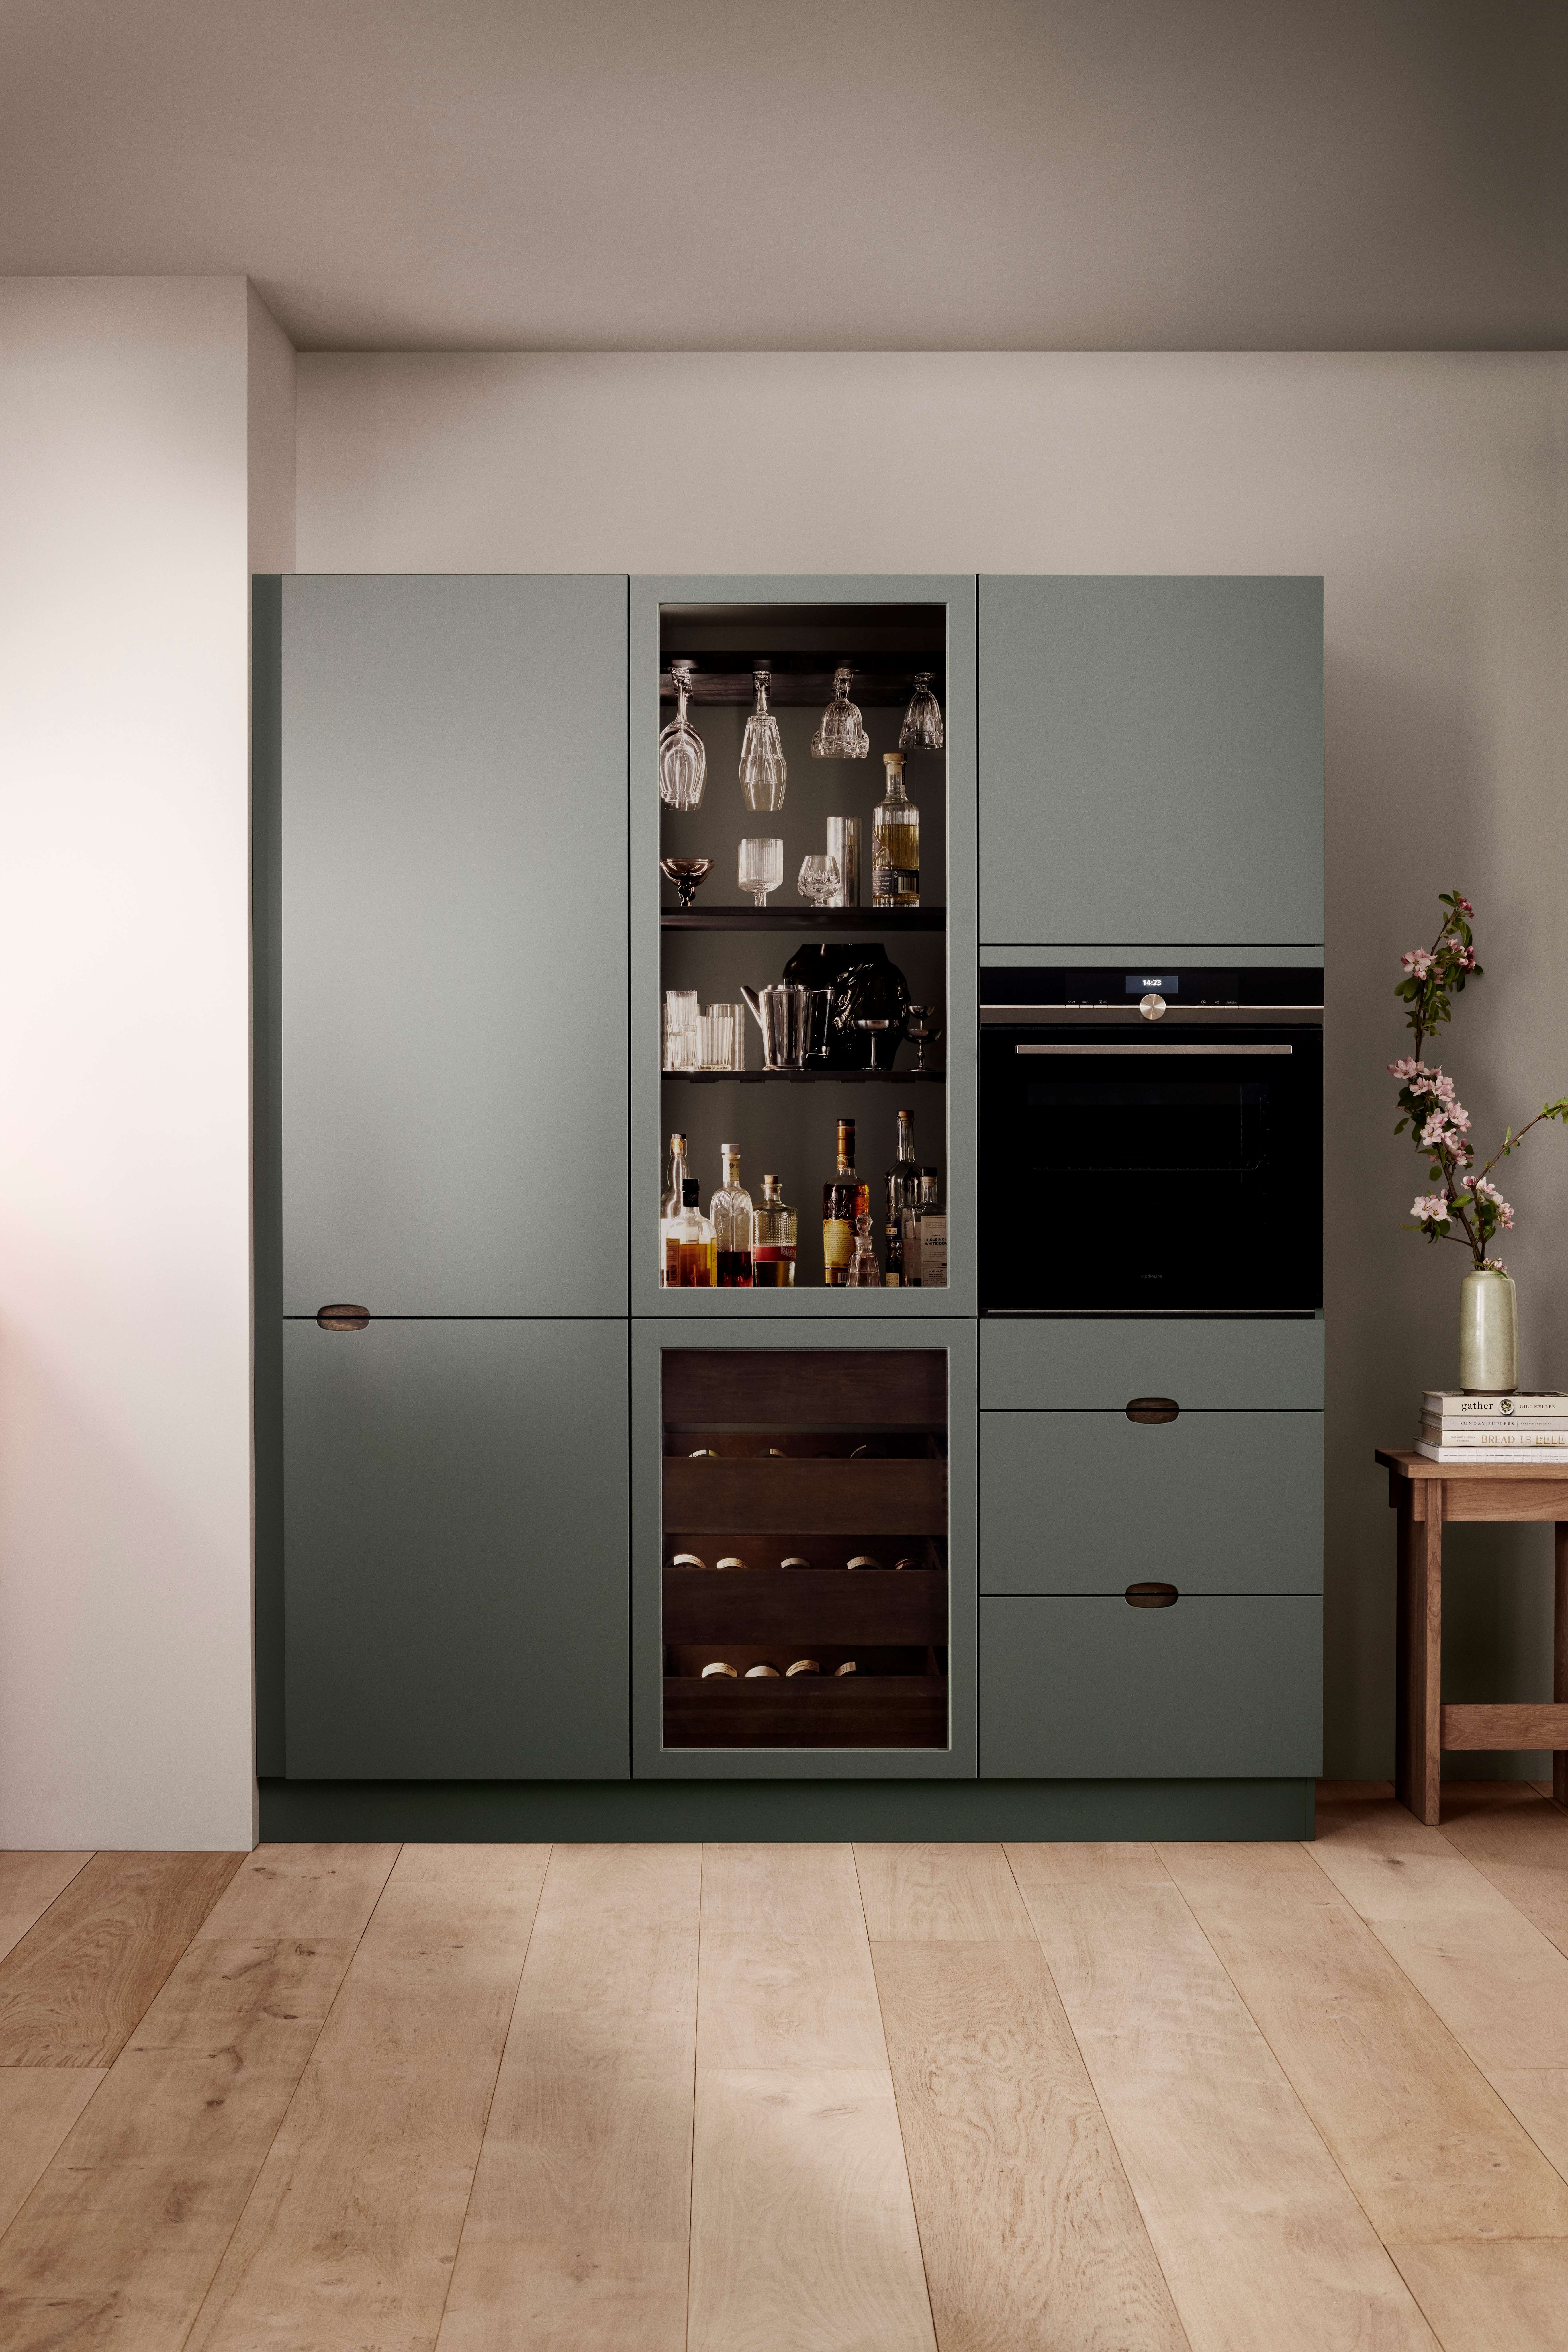 Green kitchen cabinet with an integrated oven and wine refrigerator